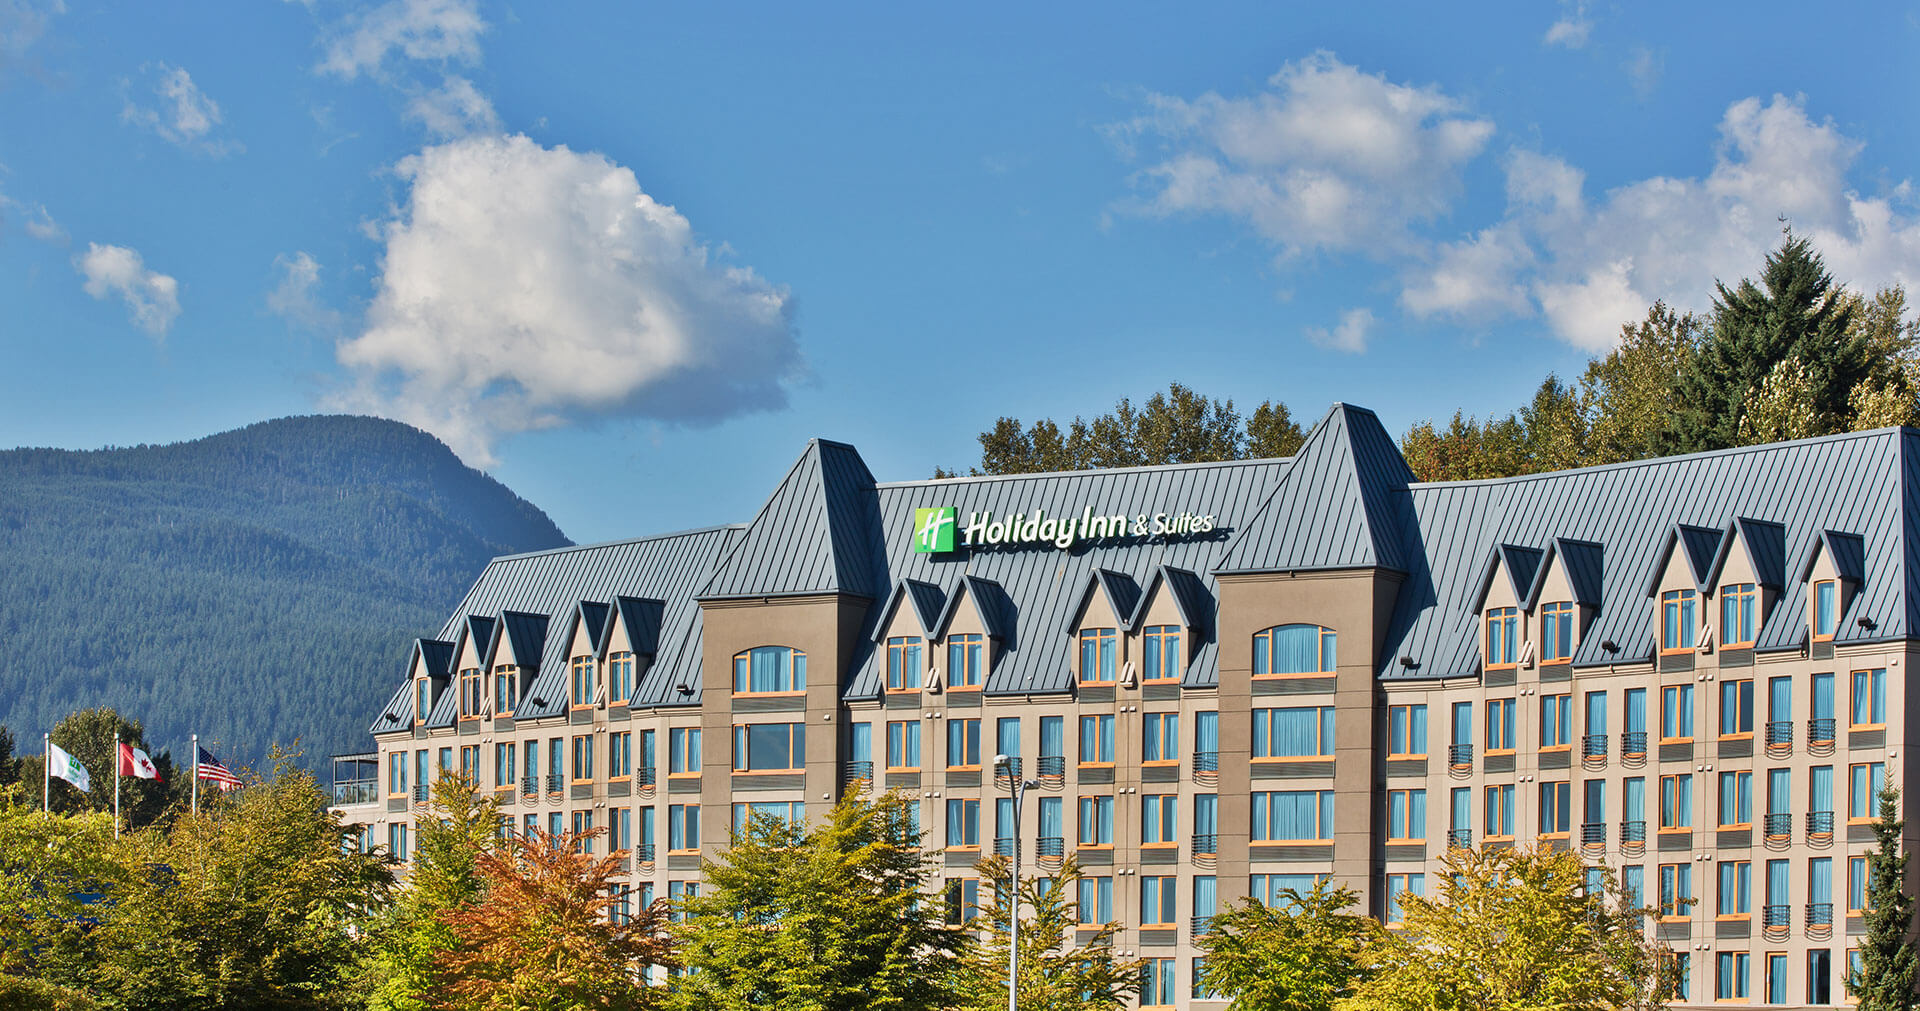 Holiday Inn North Vancouver surrounded by blue skies, trees and mountains